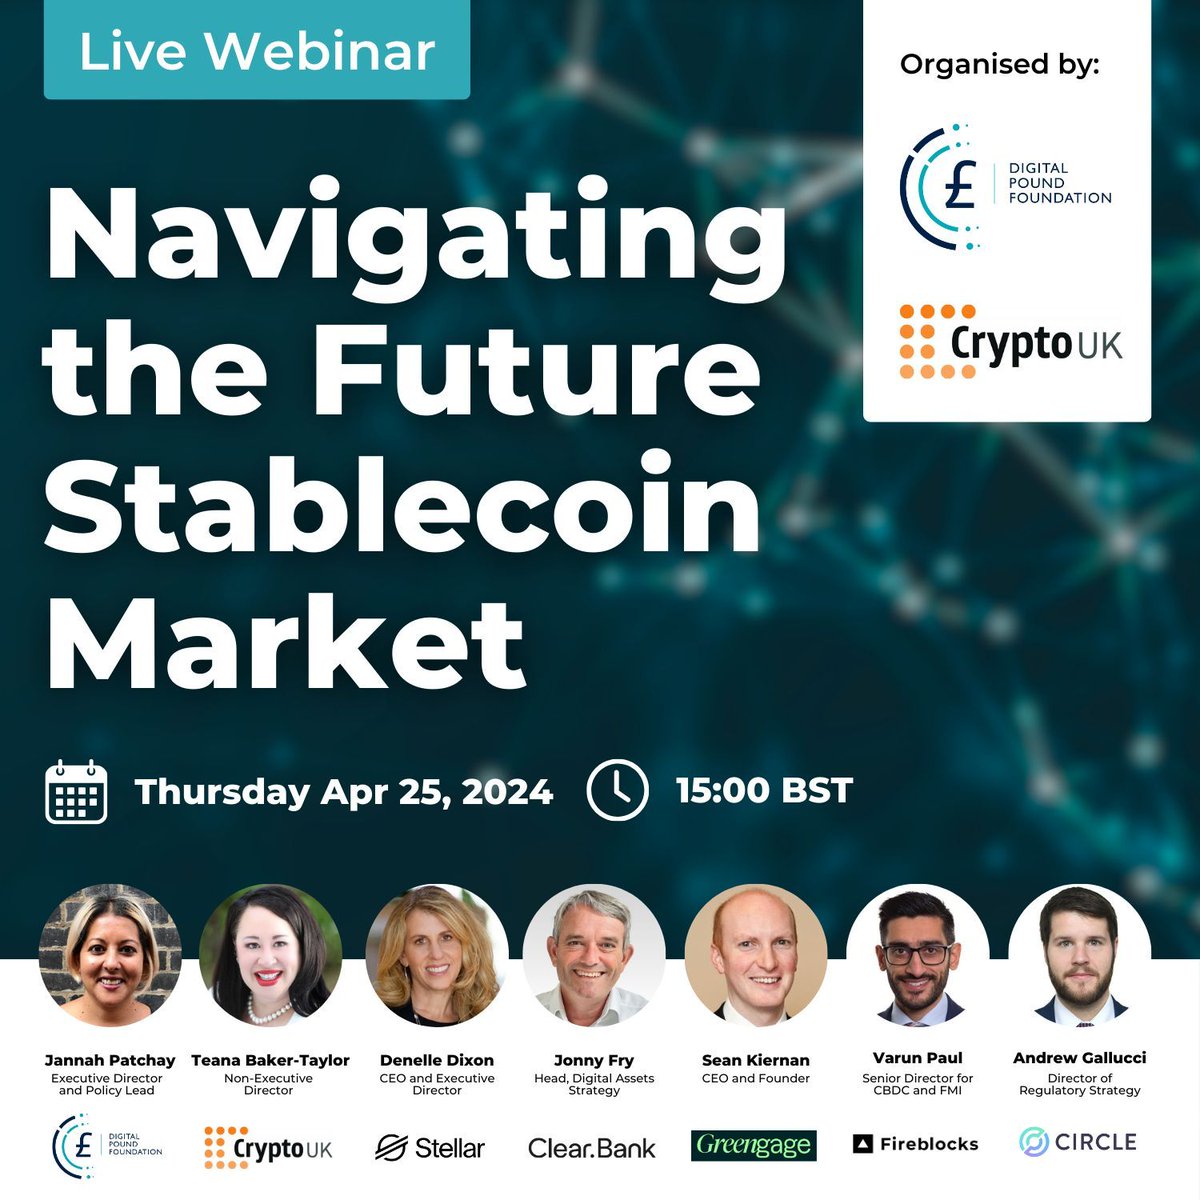 Live at 3pm BST today ⏰ We'll be joined by representatives from @CryptoUKAssoc, @StellarOrg, @clear_bank, @GreengageCo, @FireblocksHQ, and @circle for our webinar 'Navigating the Future Stablecoin Market'. Watch live 👉 buff.ly/4aj7QfZ ... #Stablecoin #Crypto #CBDC